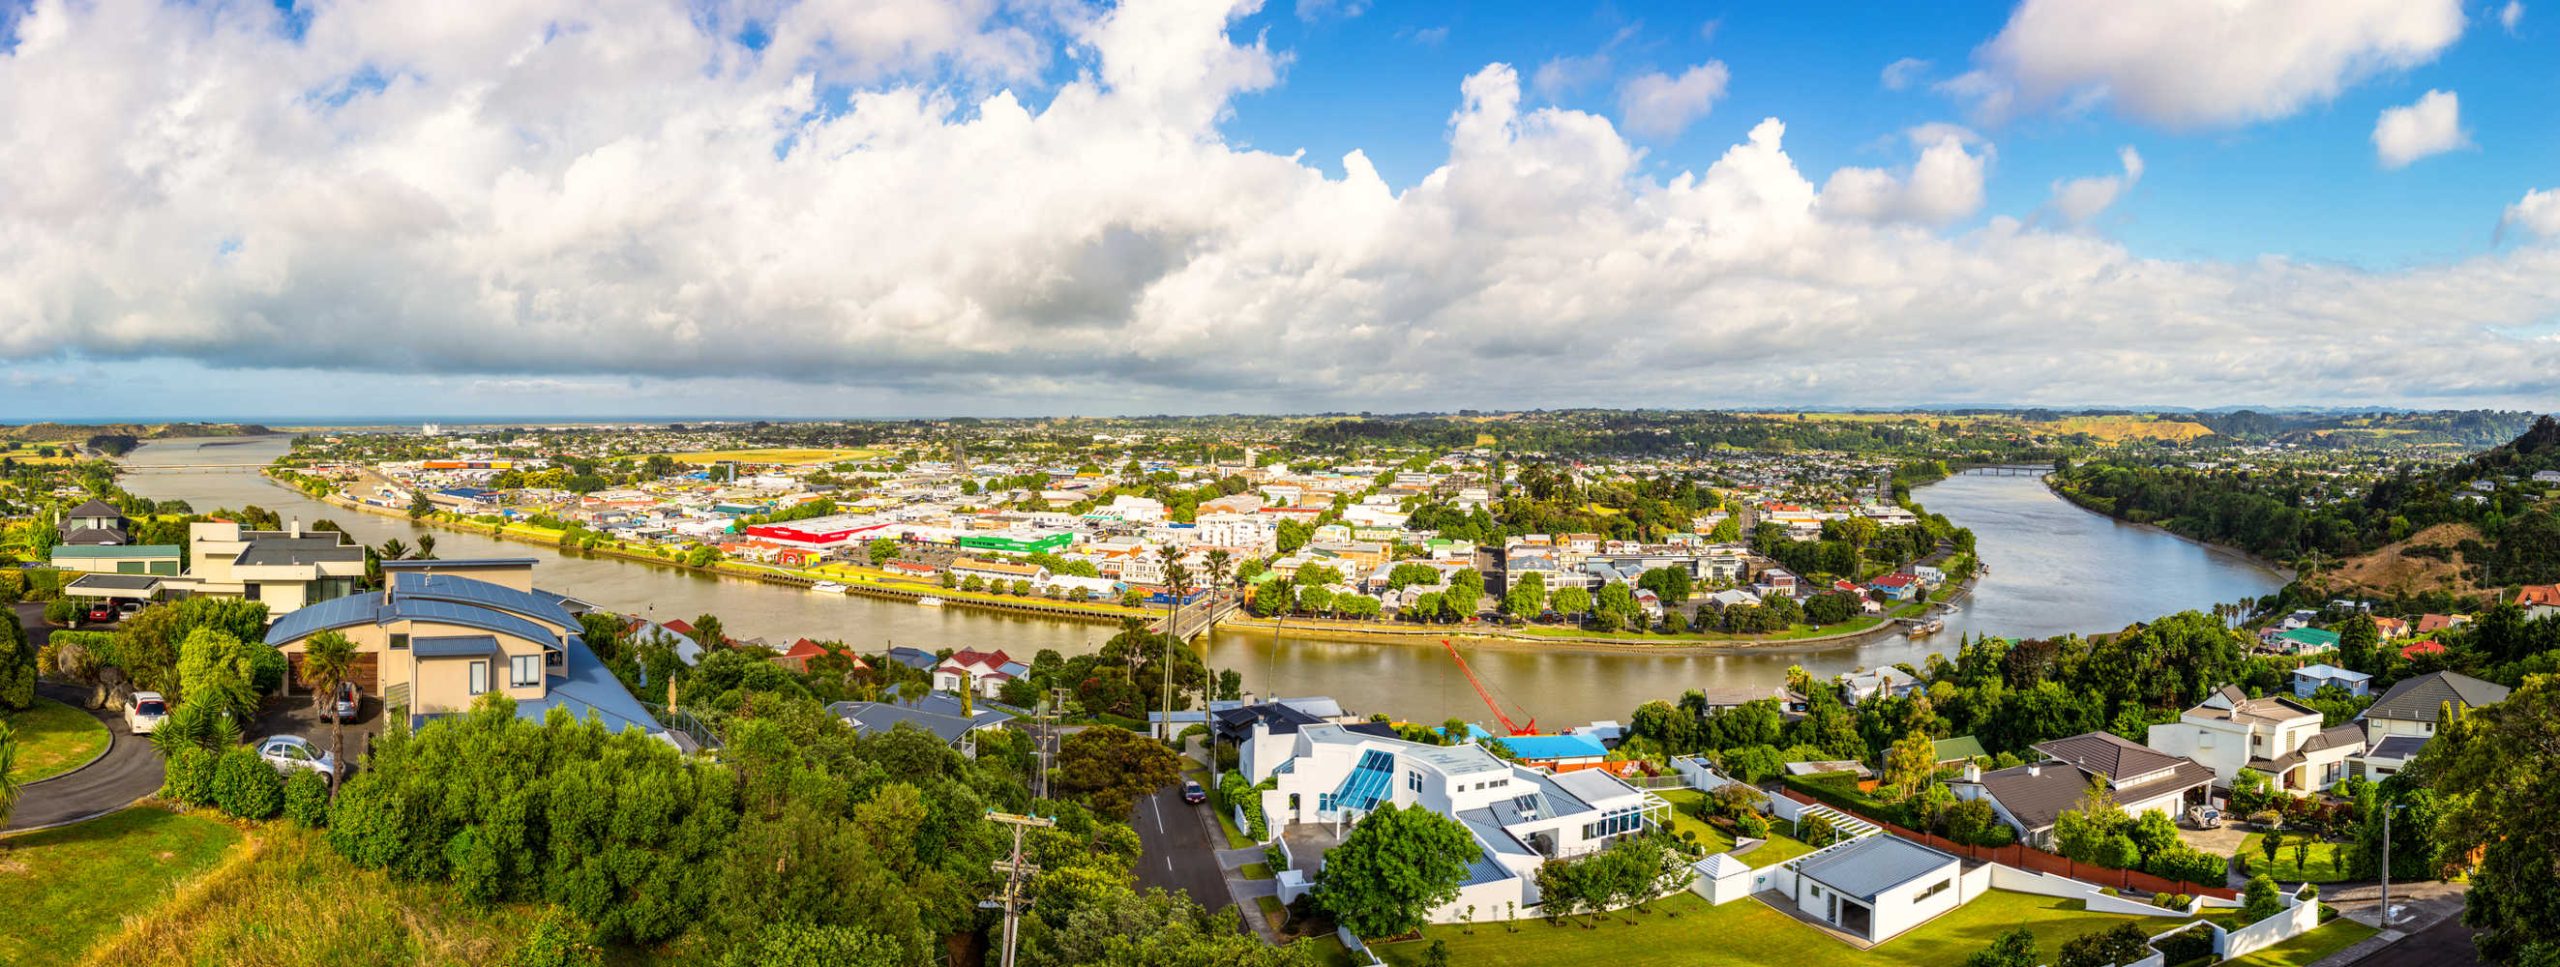 A panorama looking over the city of Whanganui, New Zealand